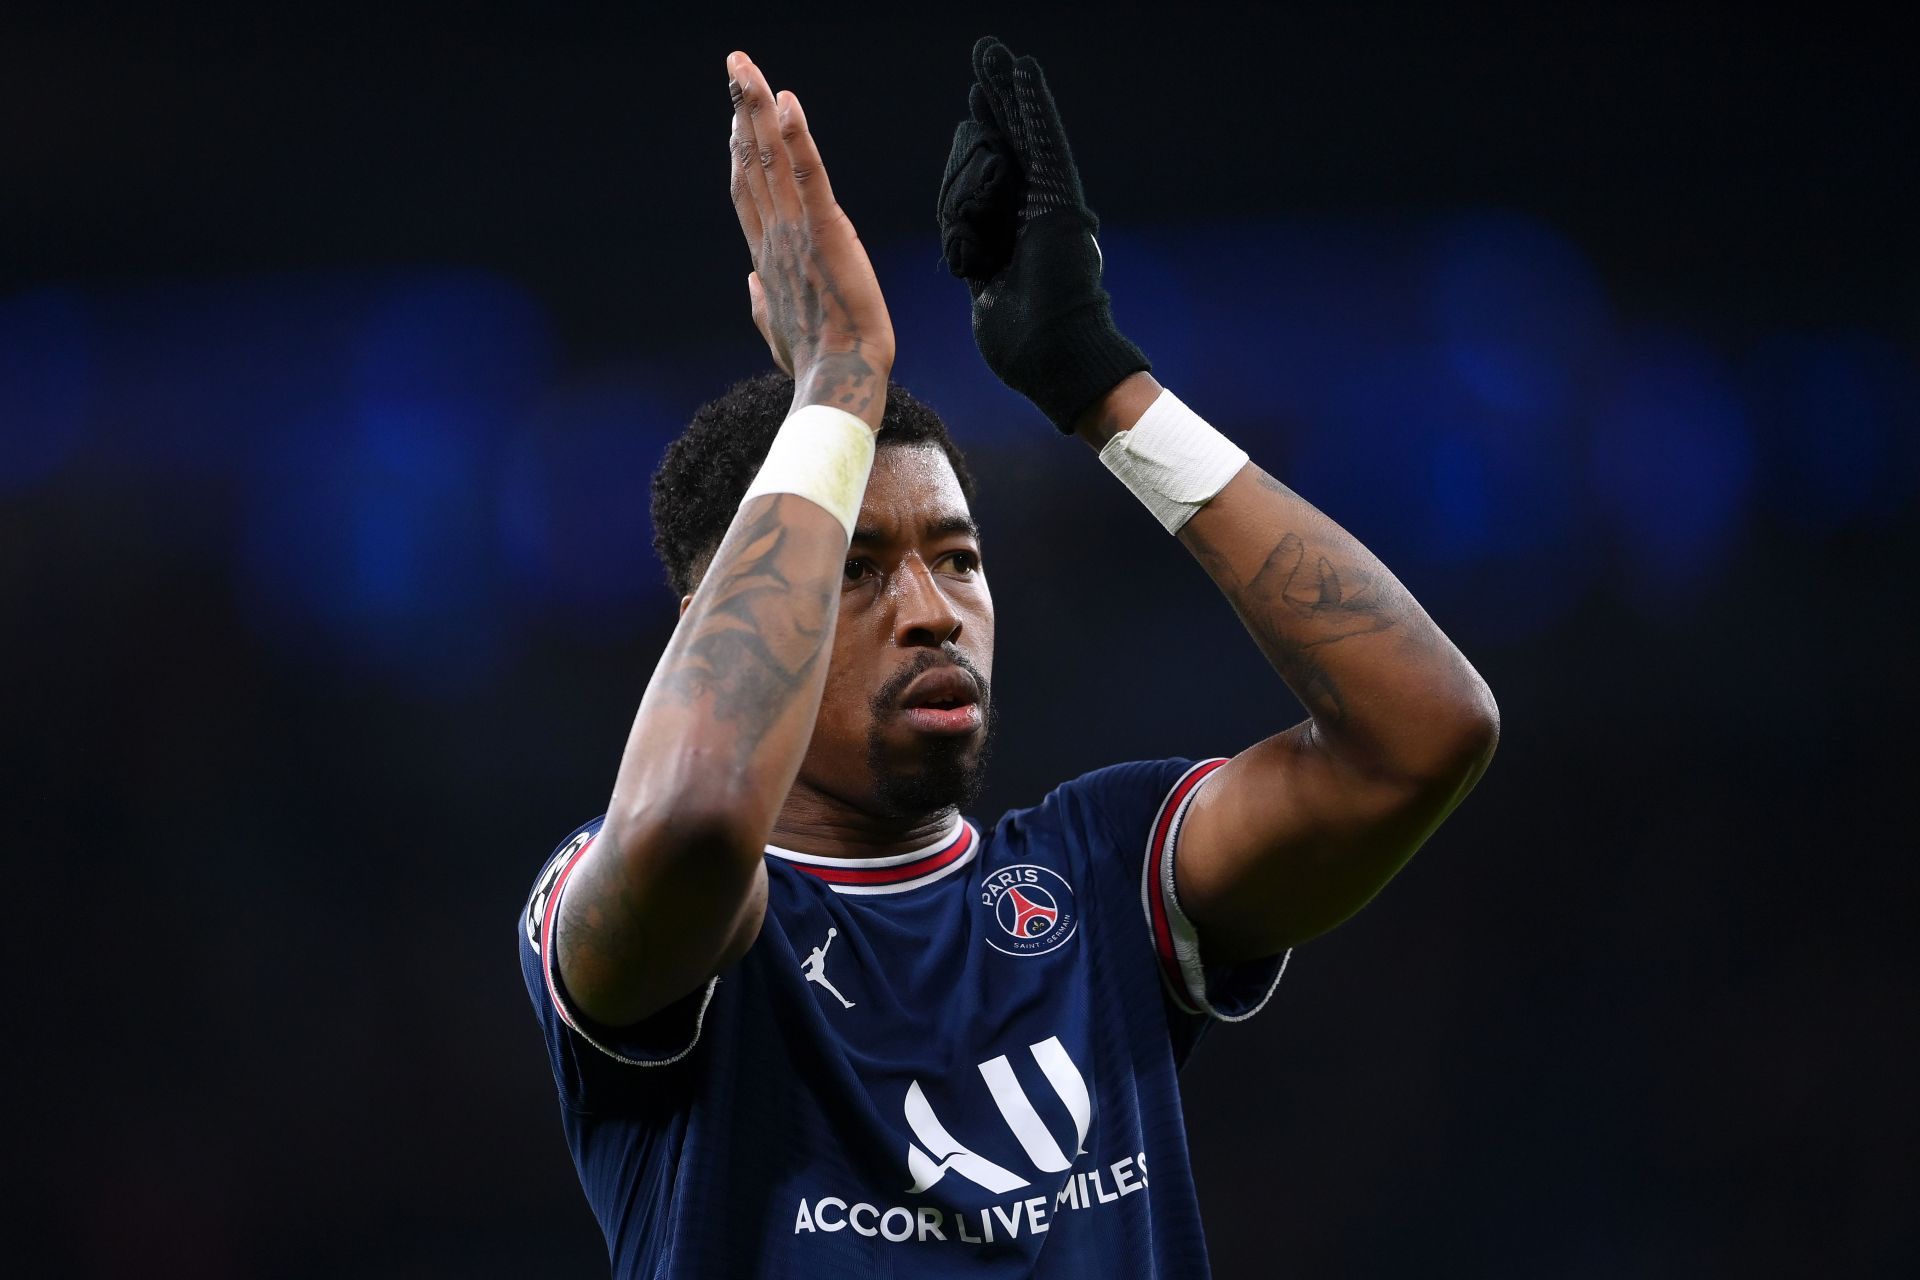 Presnel Kimpembe wants to join Chelsea.